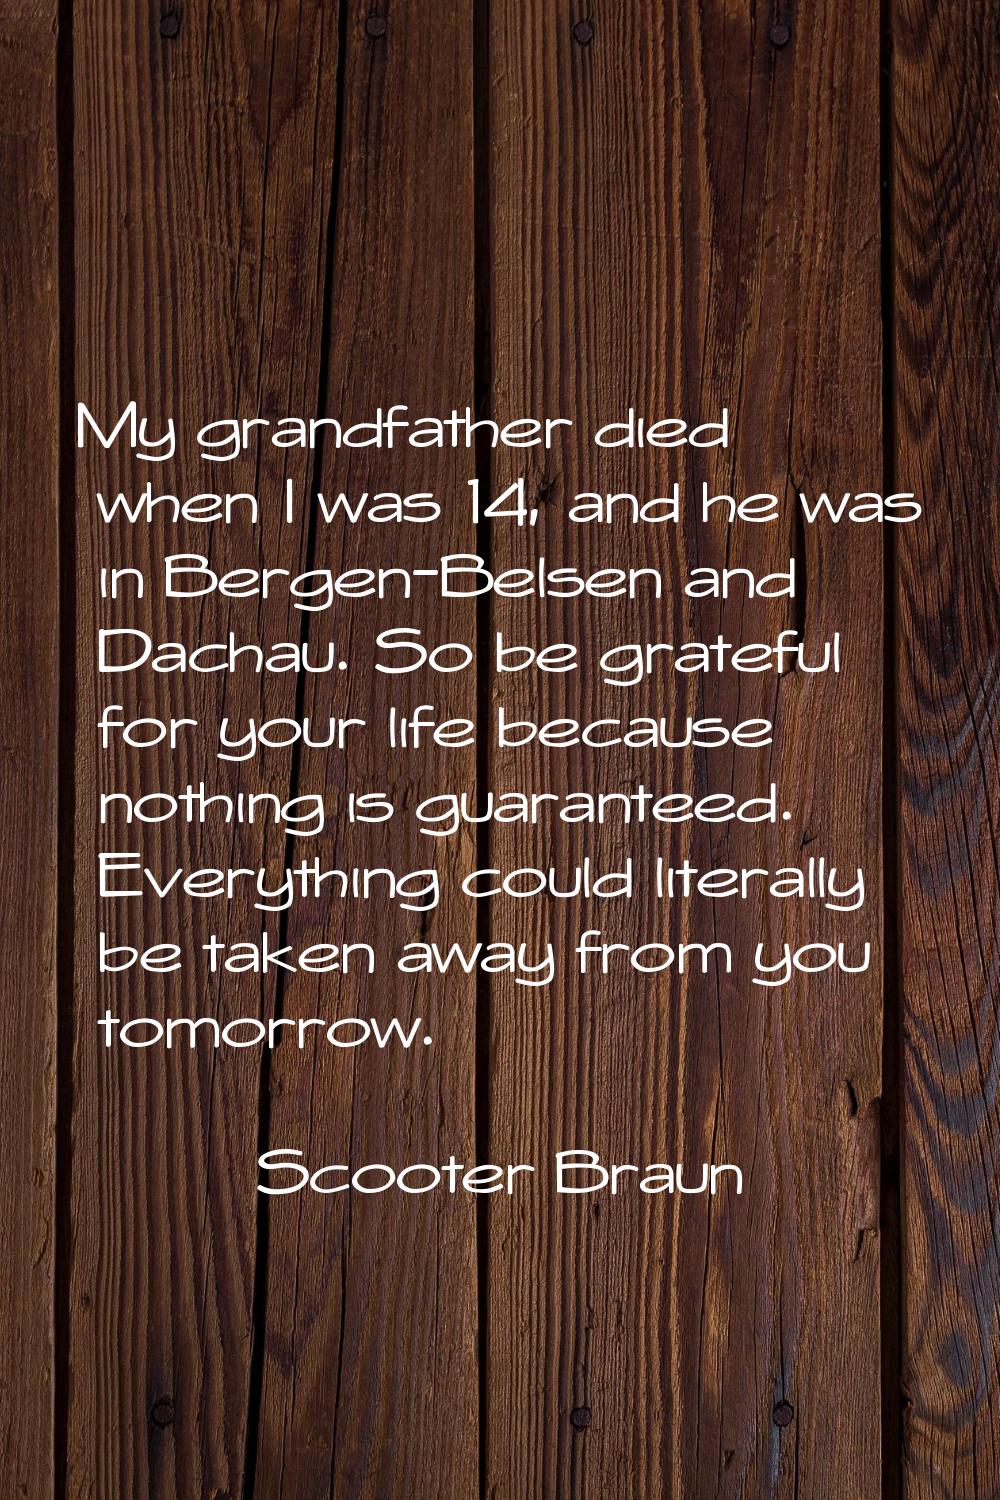 My grandfather died when I was 14, and he was in Bergen-Belsen and Dachau. So be grateful for your 